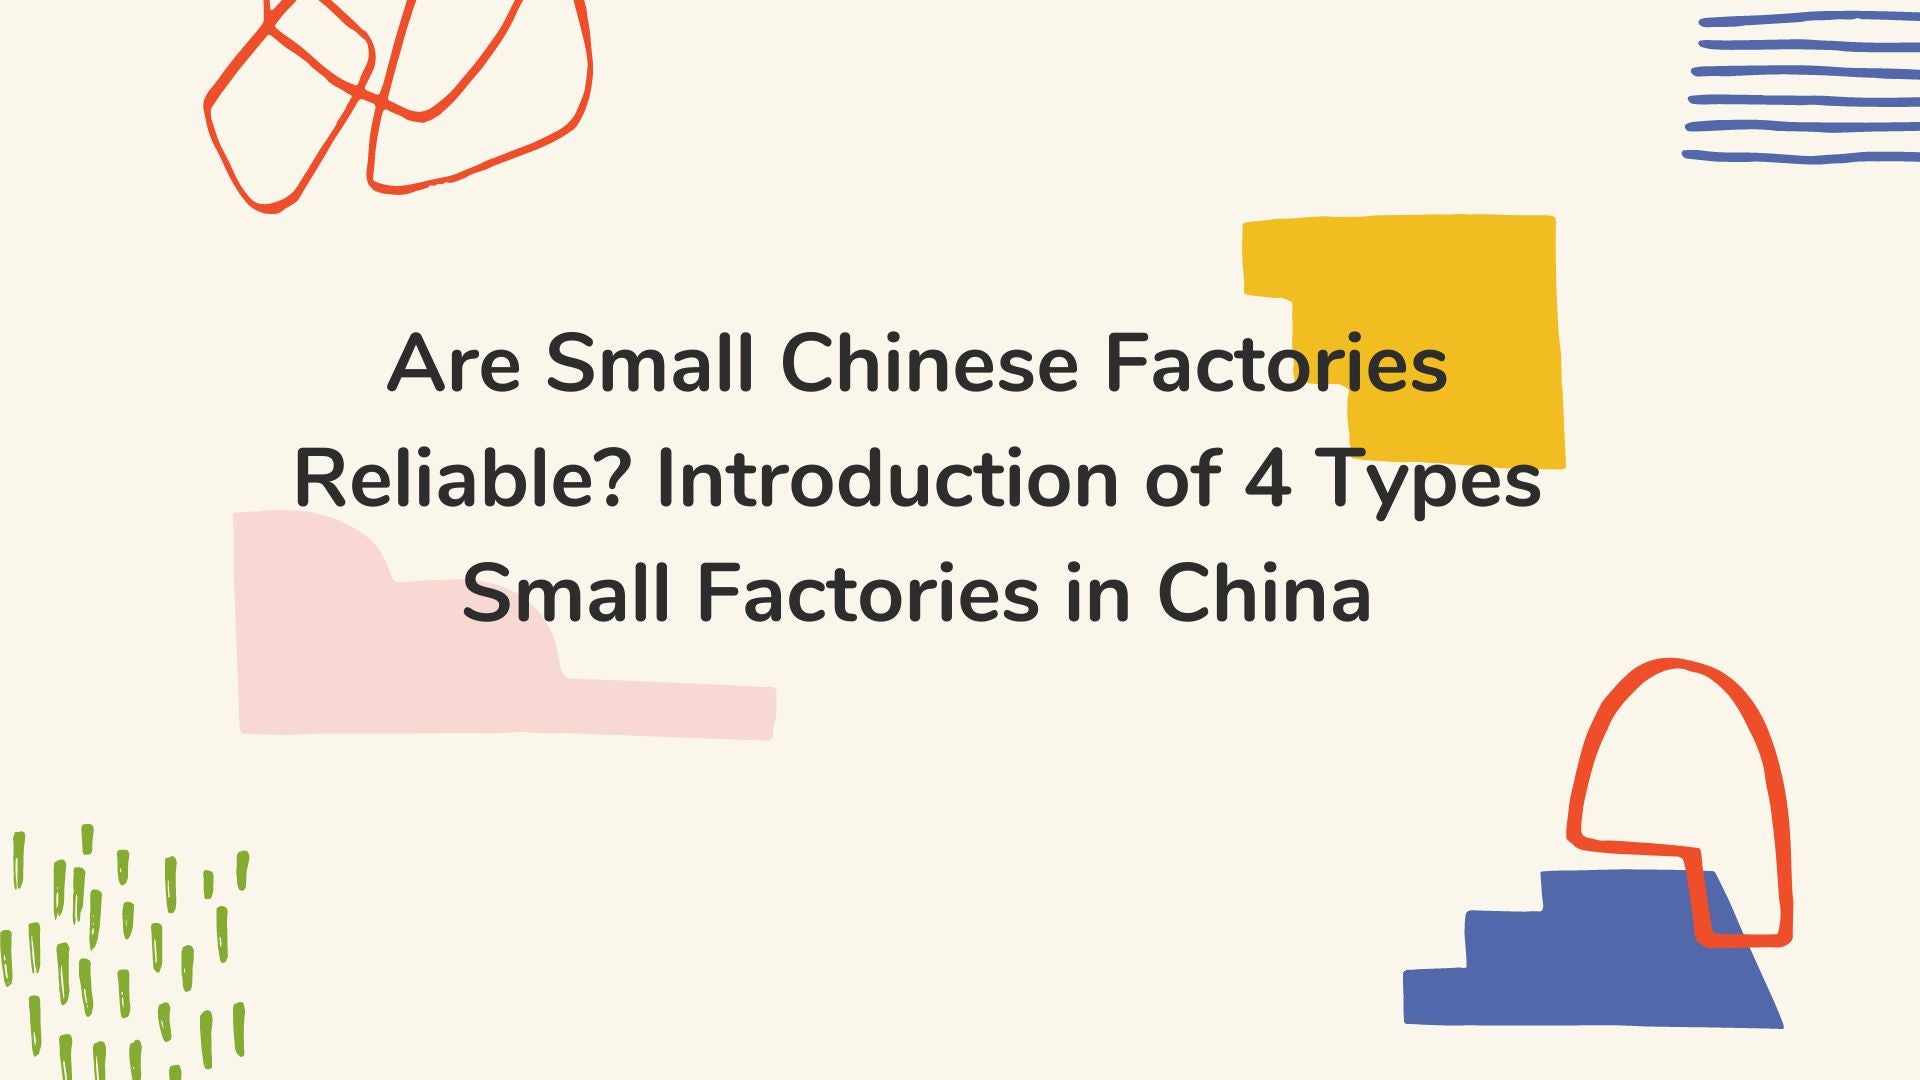 Are Small Chinese Factories Reliable? Introduction of 4 Types Small Factories in China